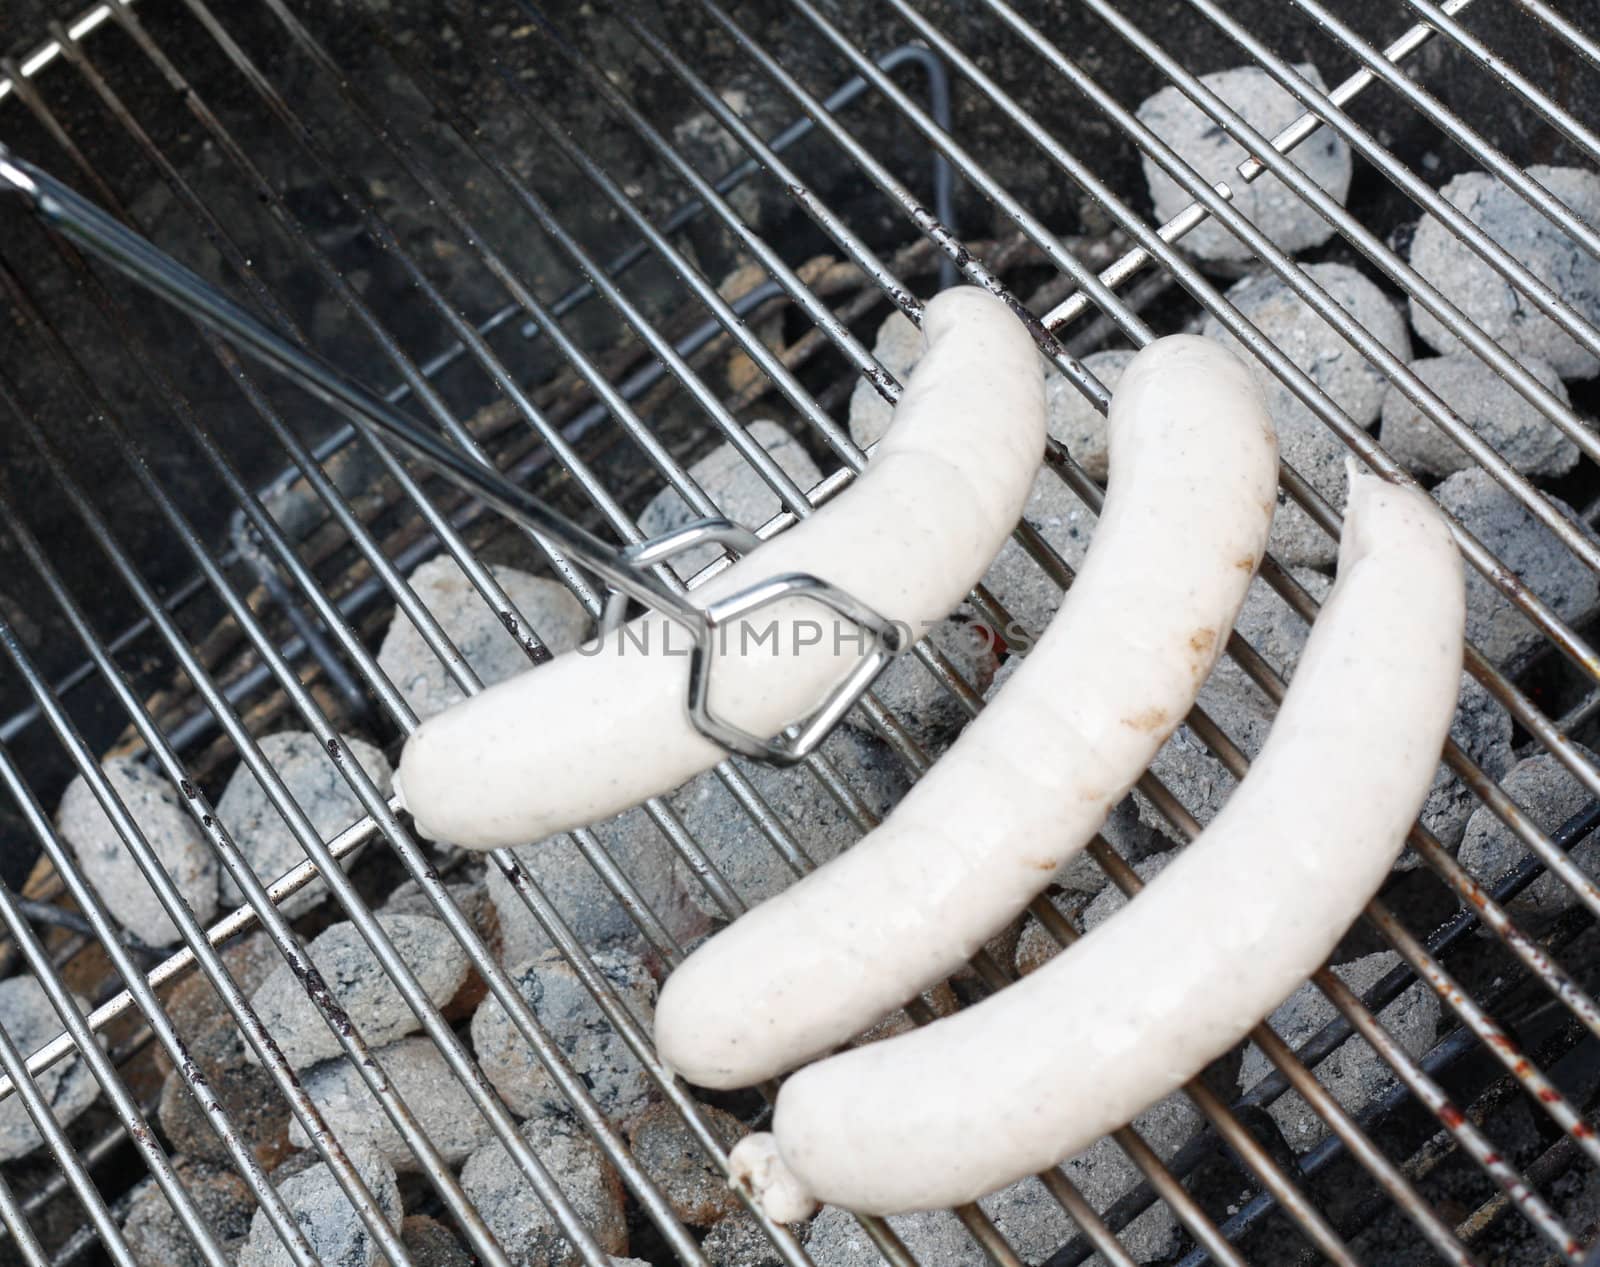 Sausages uncooked by leeser